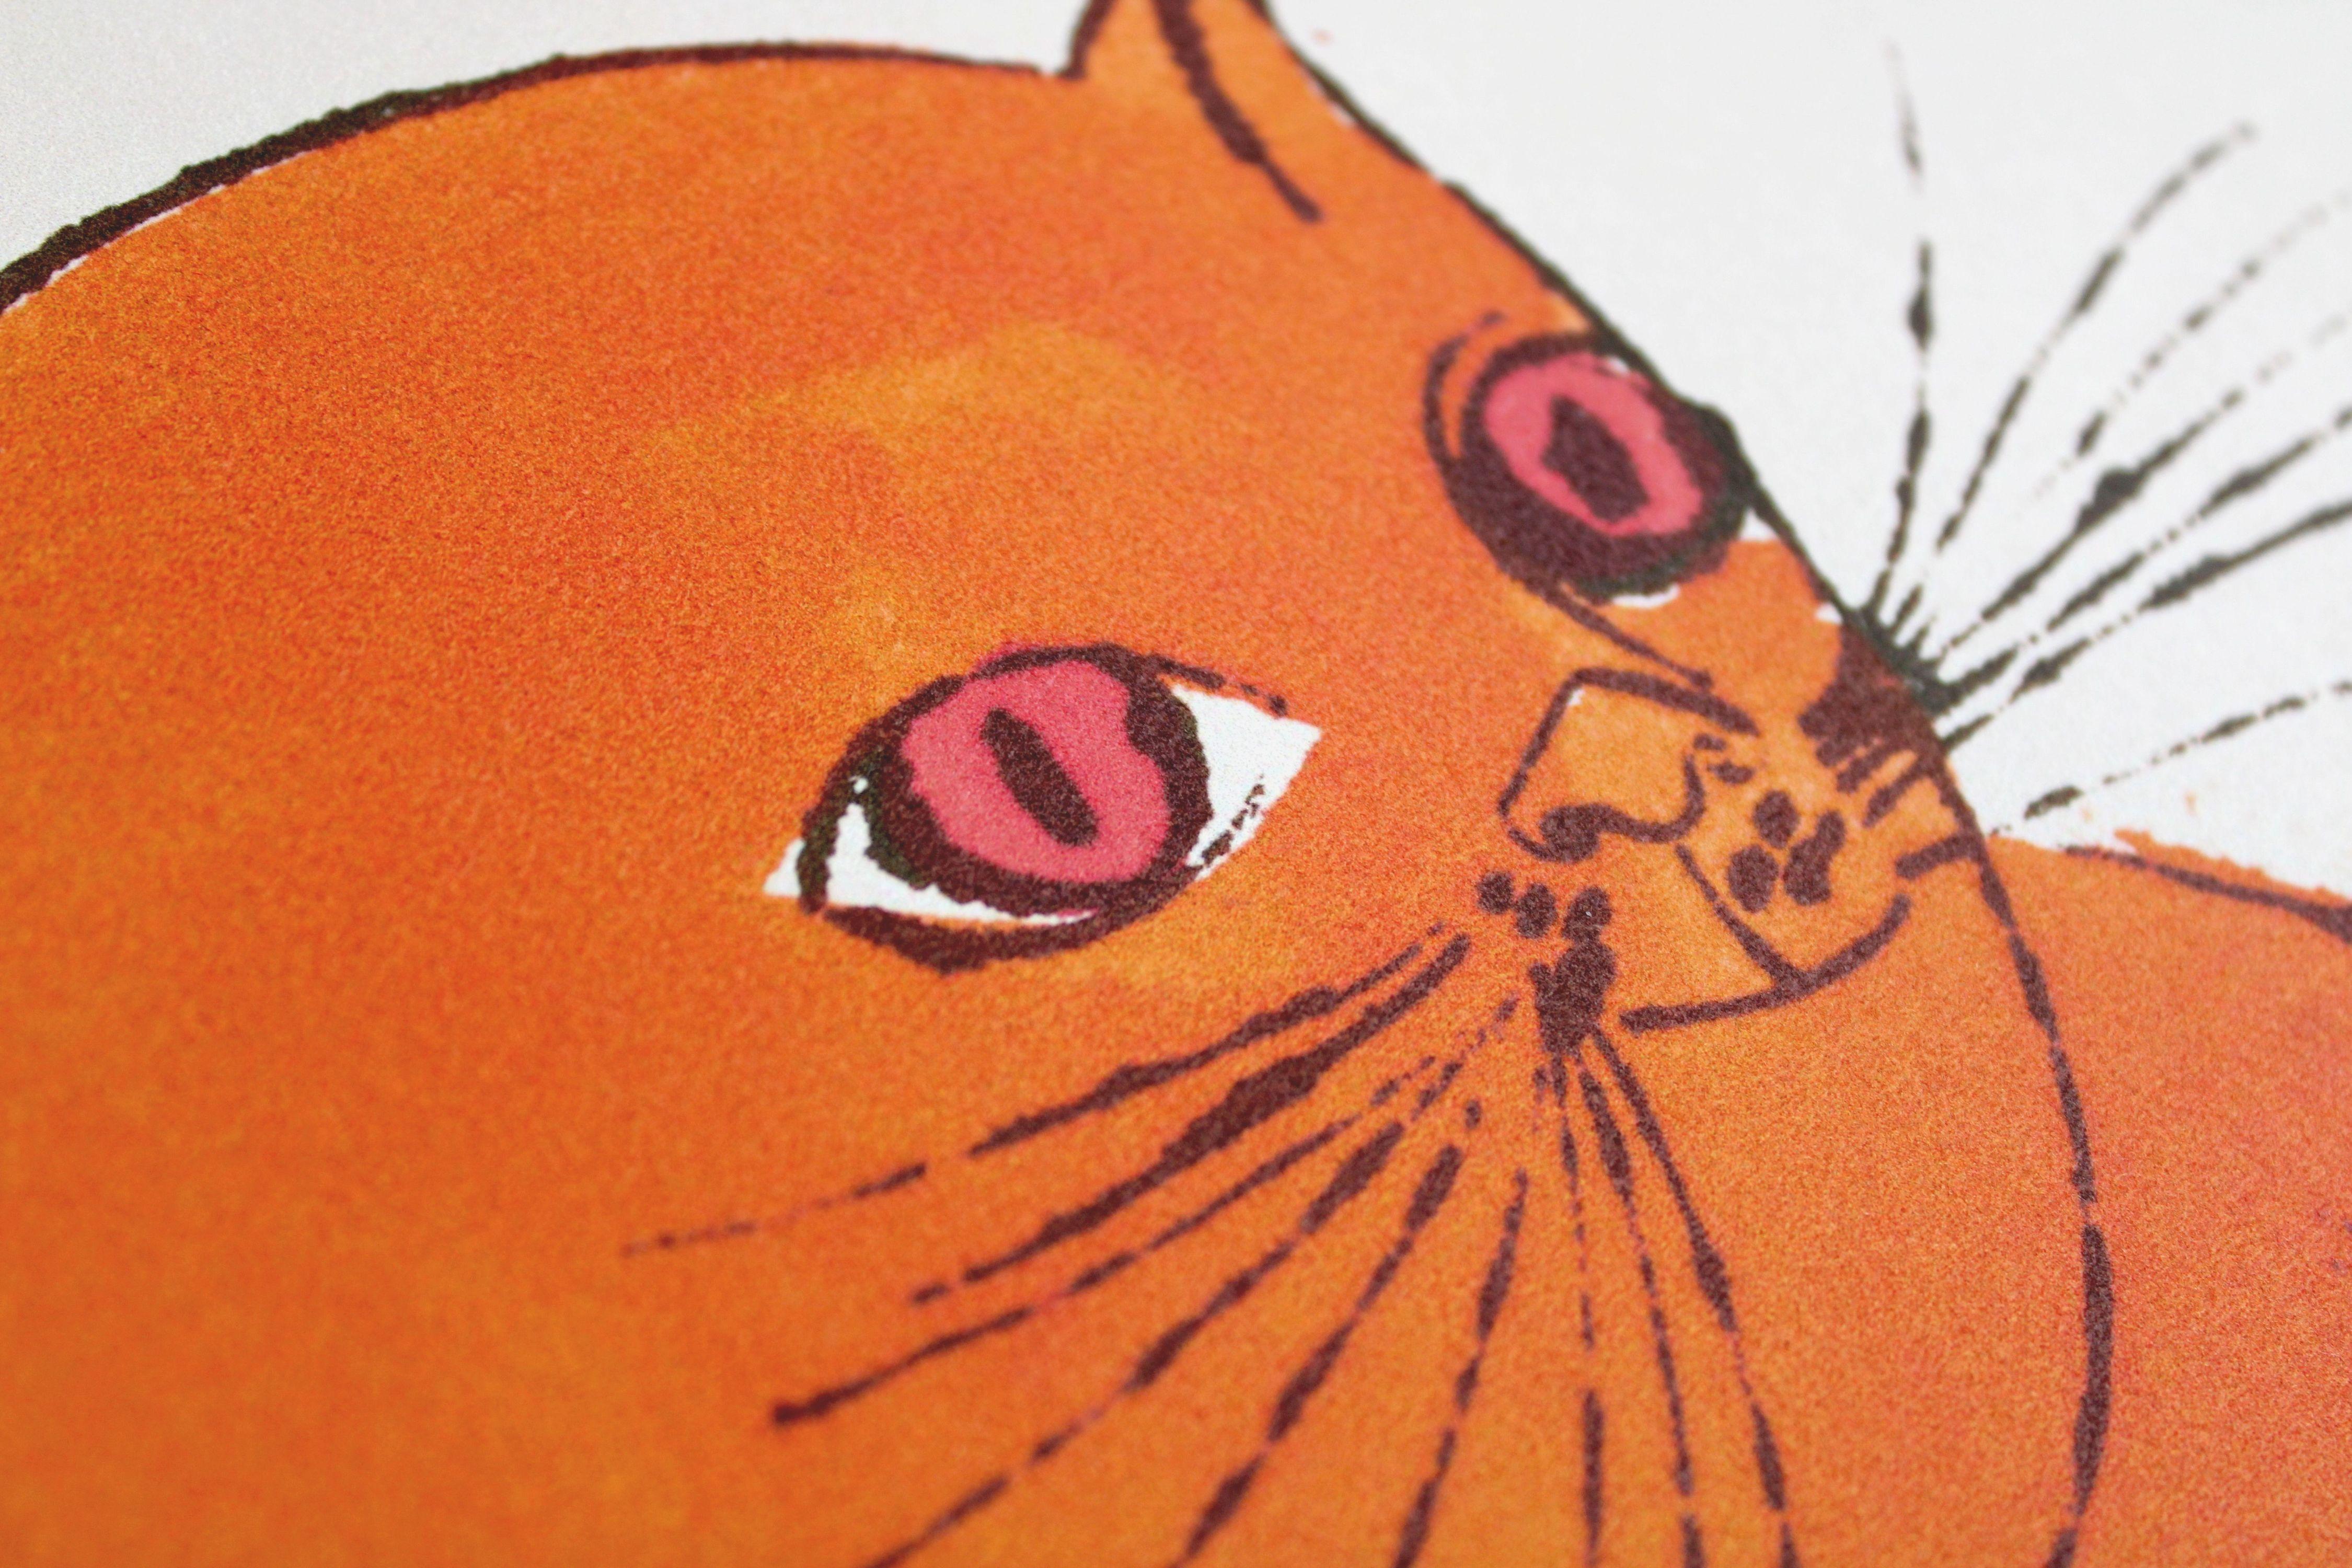 Red cat  93/100. Lithography, offset printing, imprint size 42x27. 5 cm 3